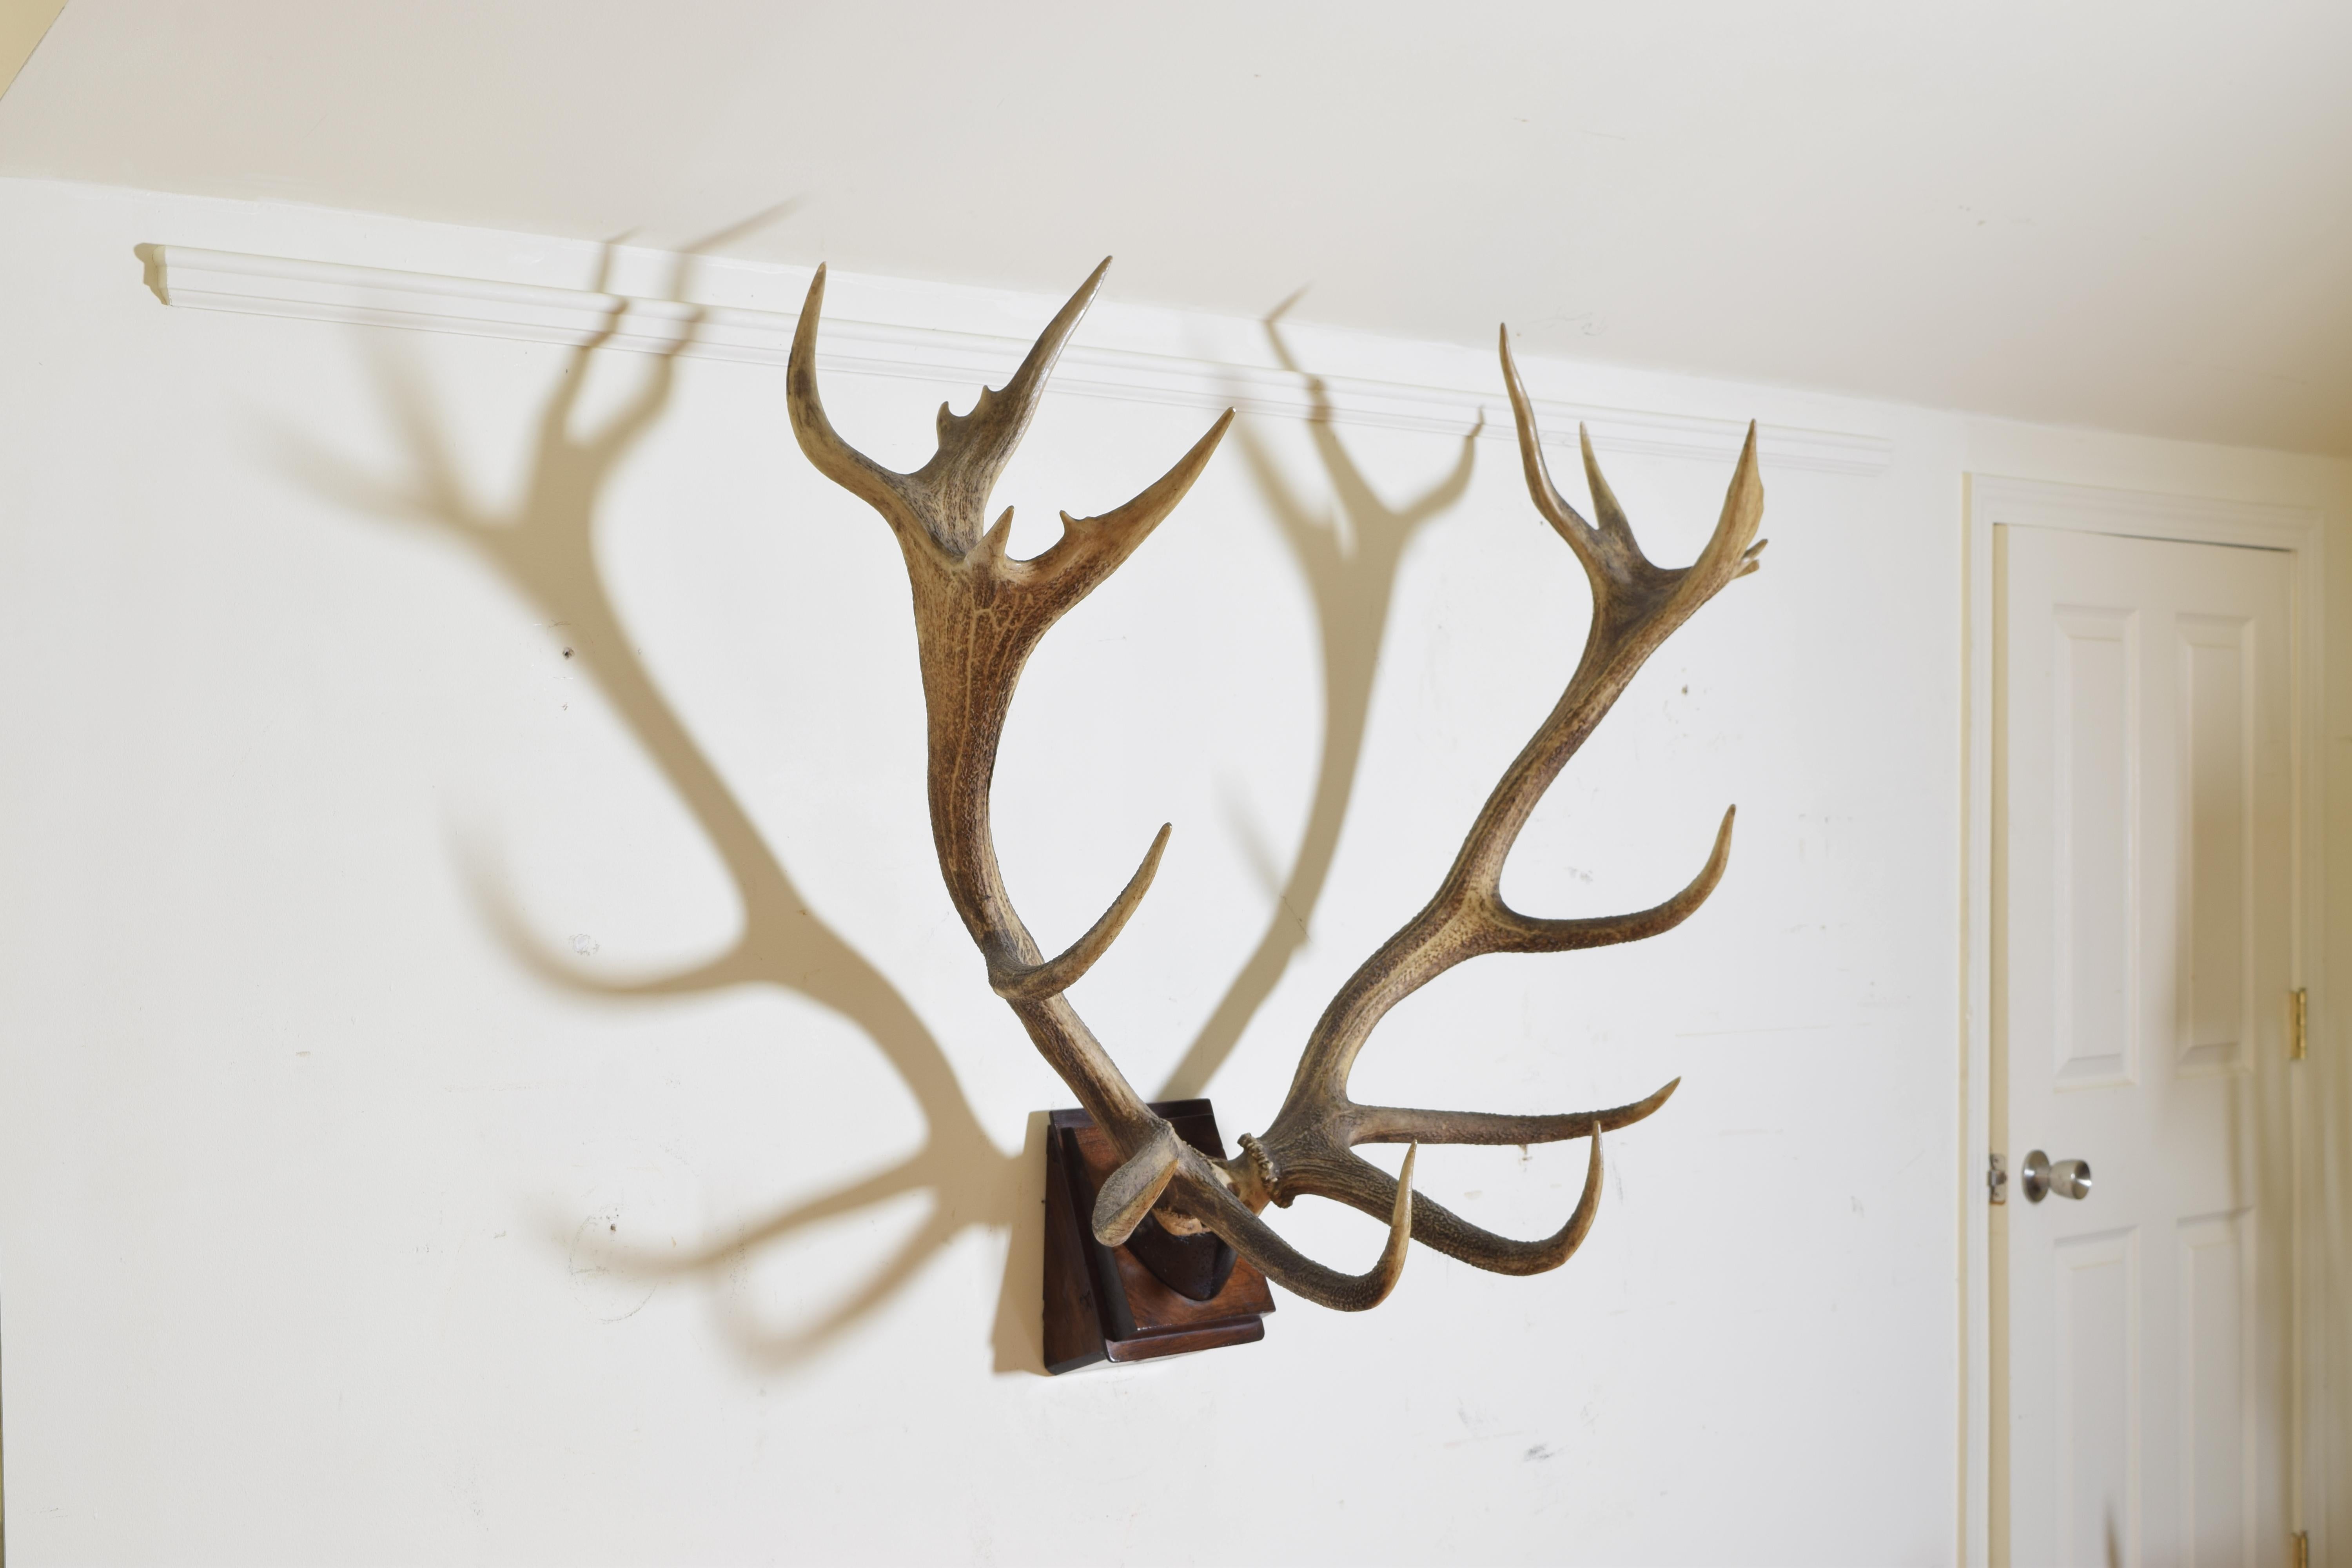 European Italian Red Deer and Partial Skull Mount, Early 20th Century